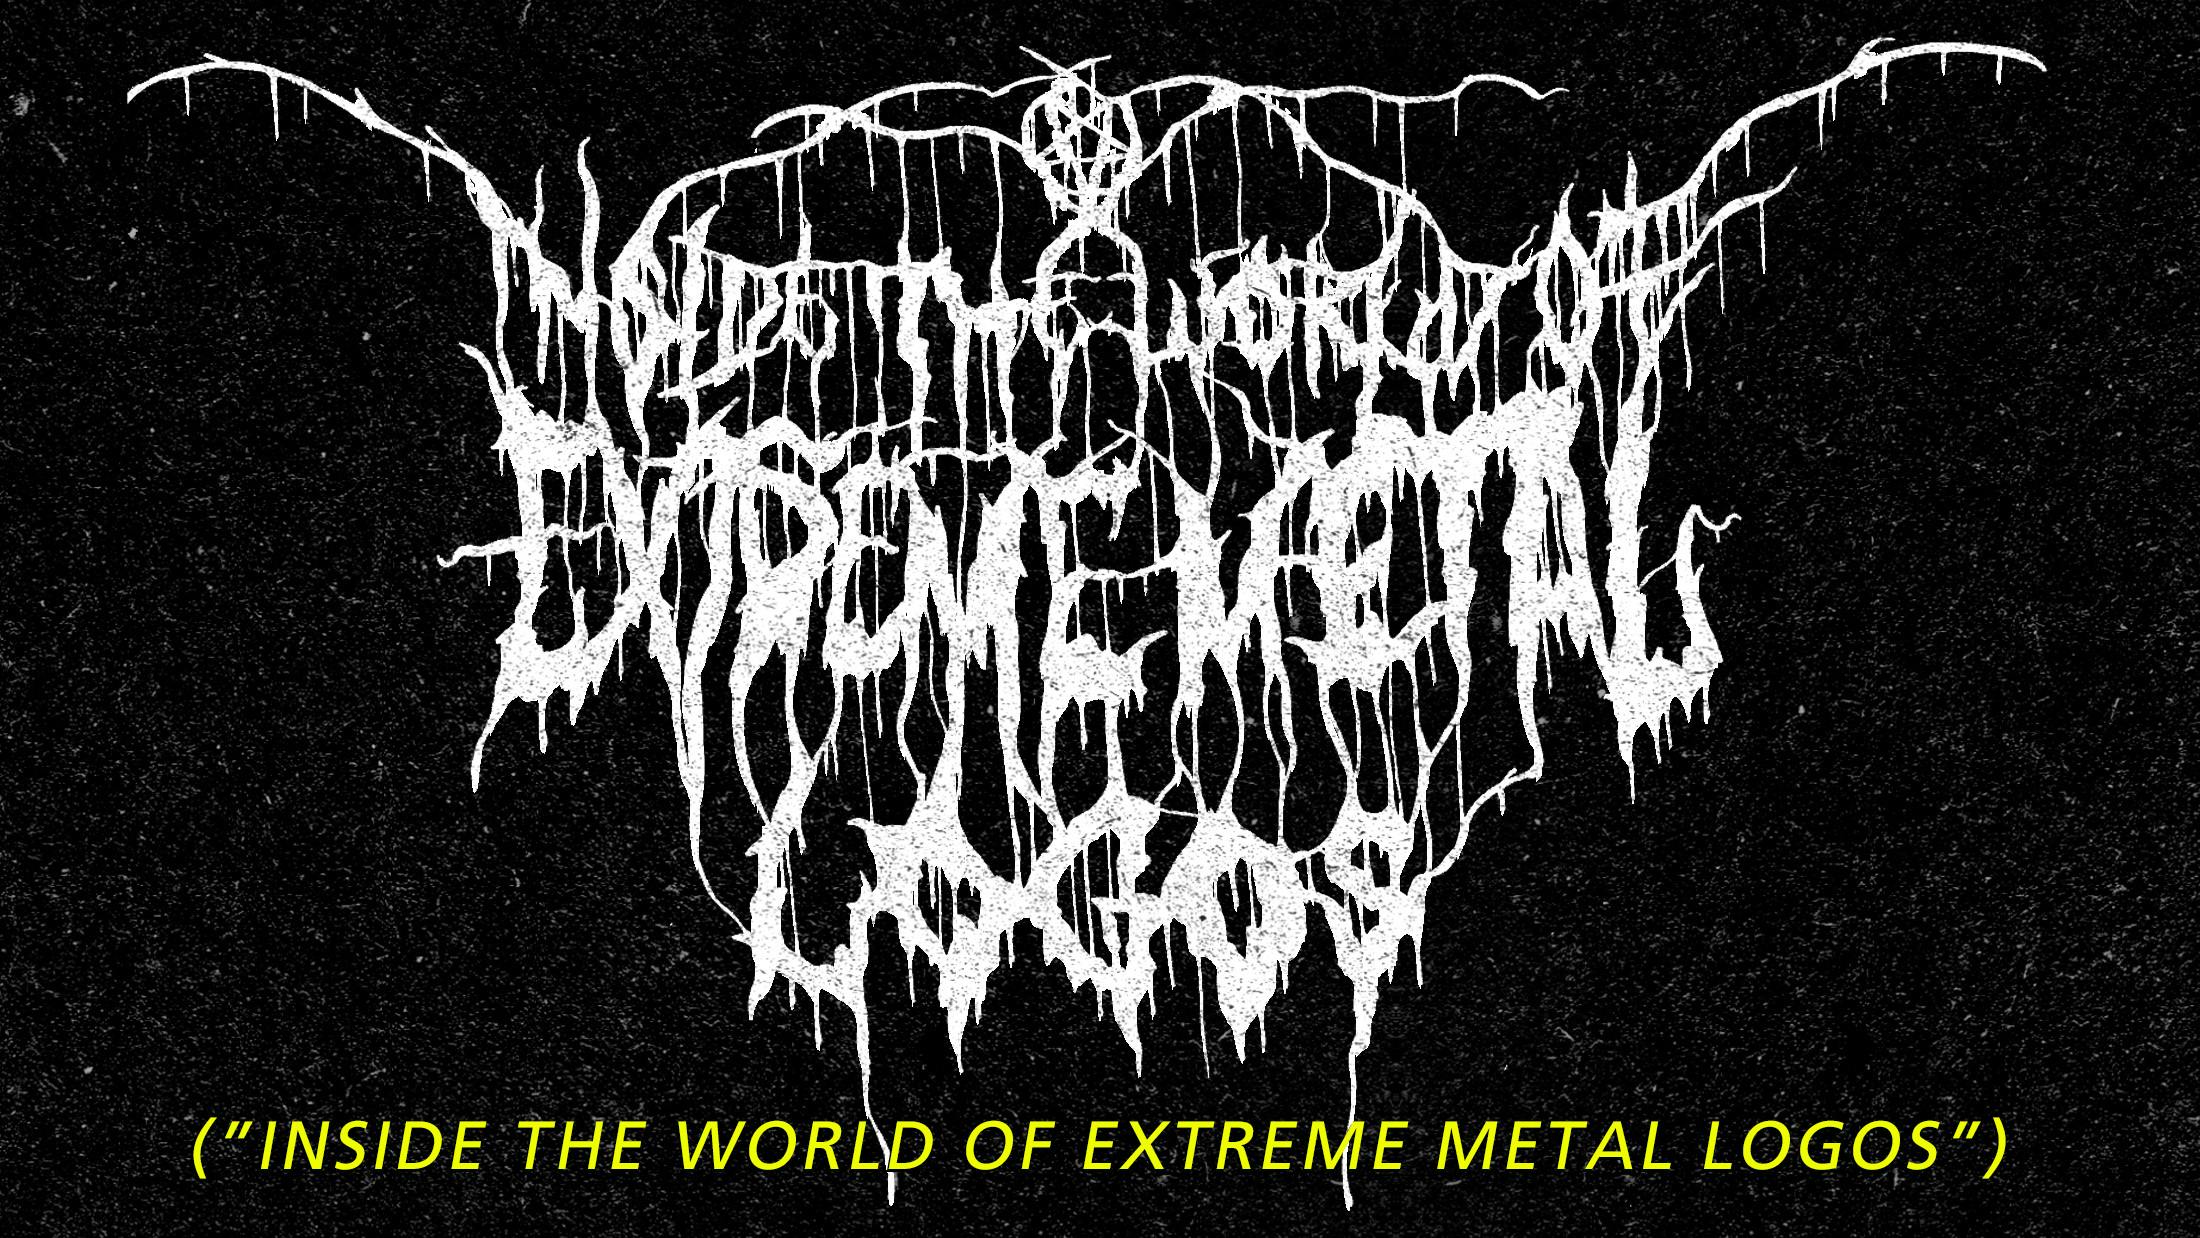 From Mayhem to Metallica: Inside the world of extreme metal logos